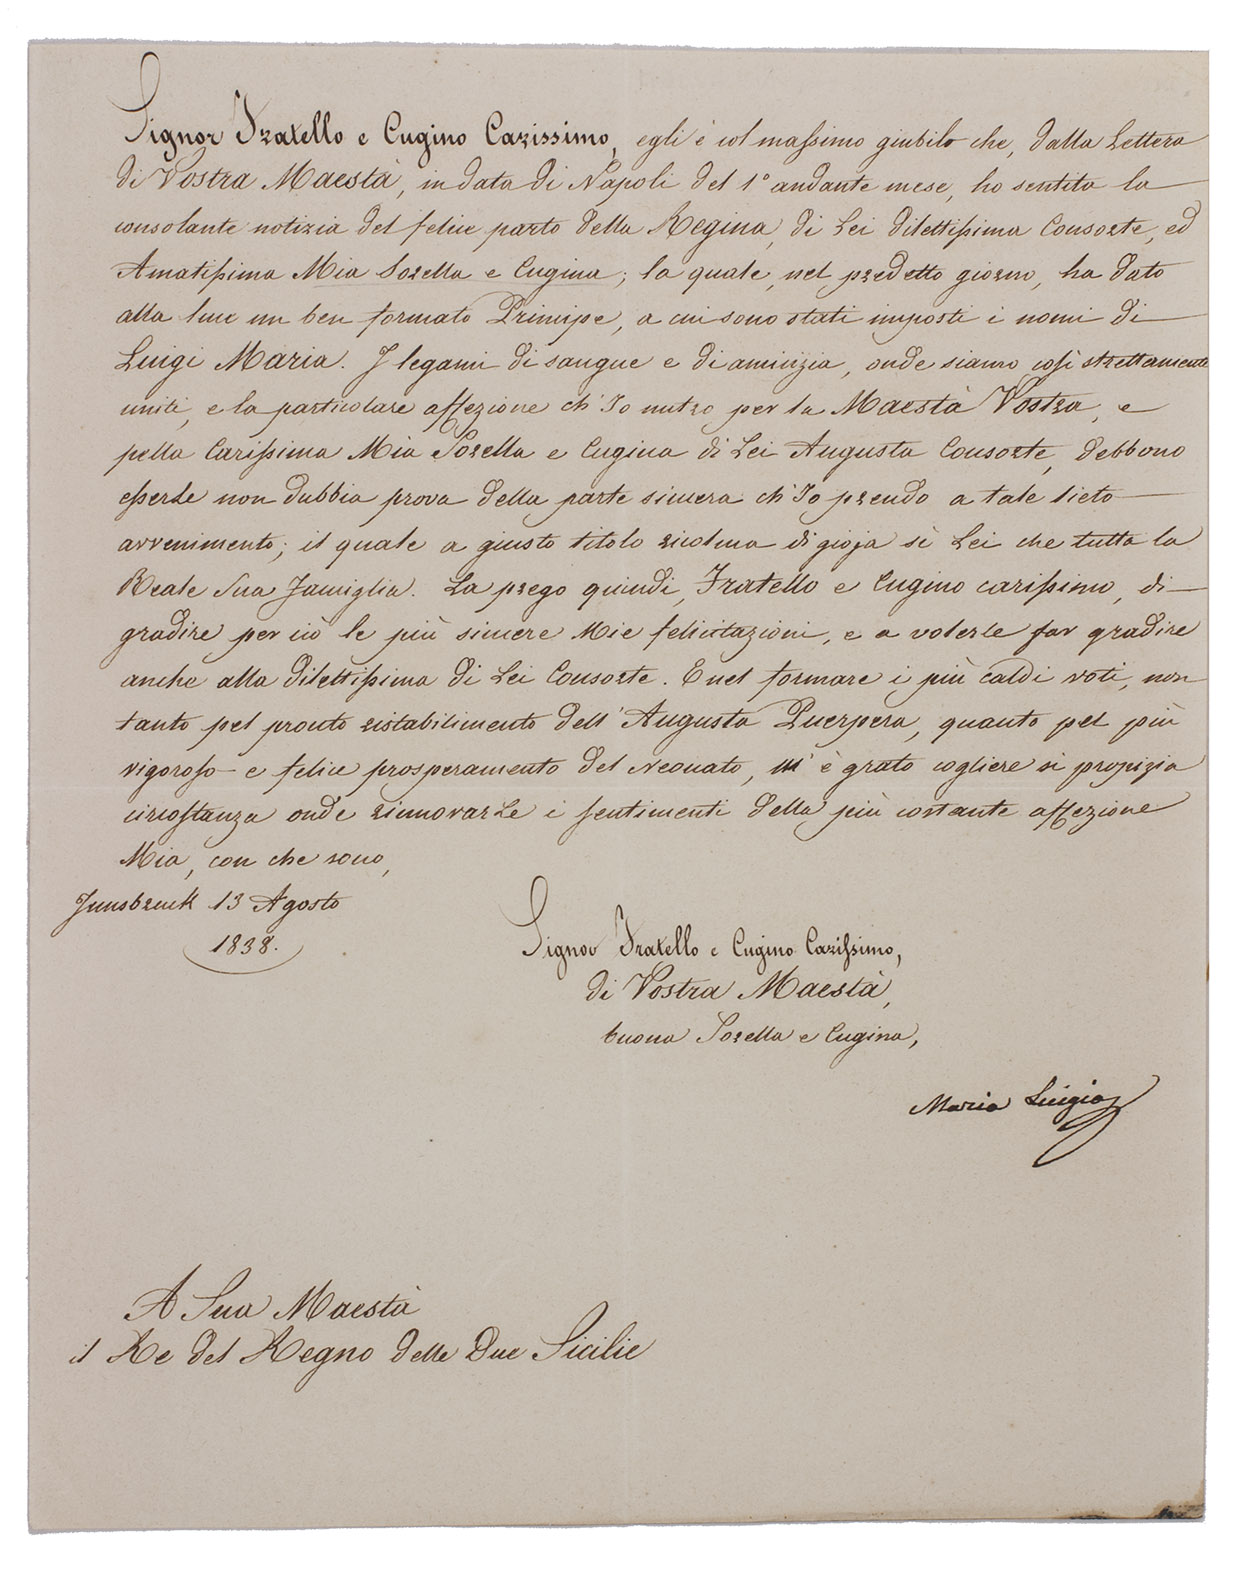 [AUTOGRAPH]. LUIGIOS, Maria [= MARIA KAROLINE LUISE CHRISTINE OF AUSTRIA?]. - [Signed letter to Ferdinand II, king of Two Sicilies].Innsbruck, 13th August 1838. 25 x 20 cm. Signed manuscript letter in brown ink on paper in Italian, with signature 'Maria Luigios'.